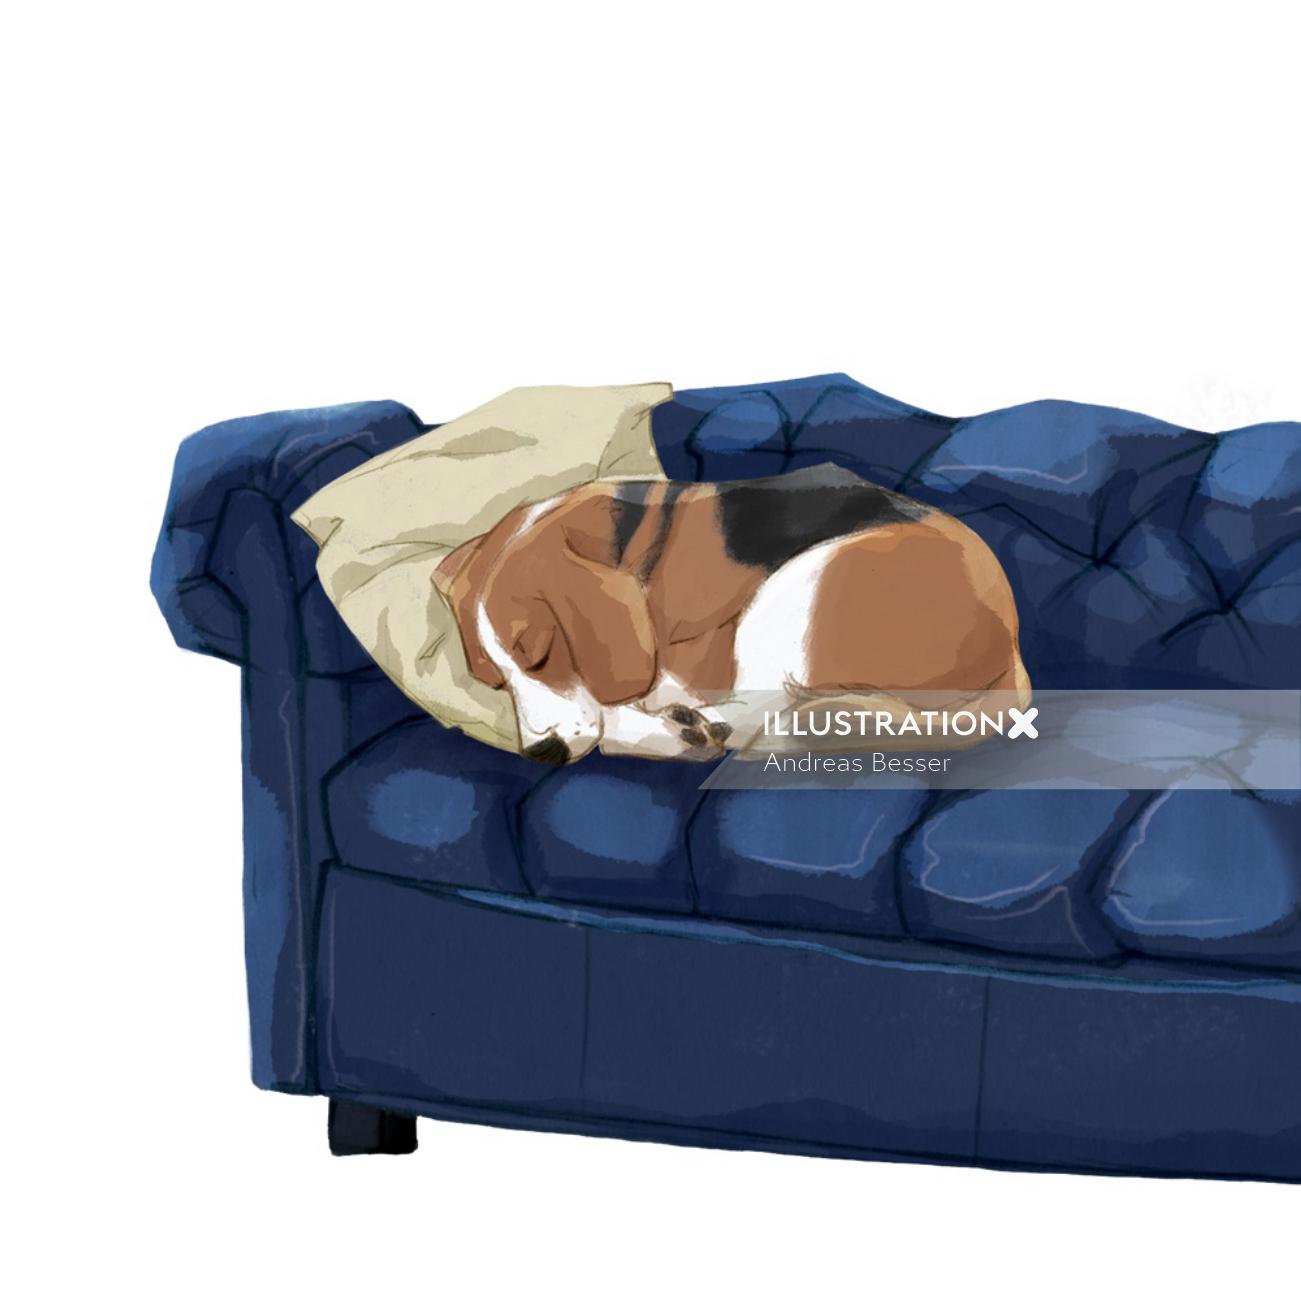 Dog sleeping on a couch illustration